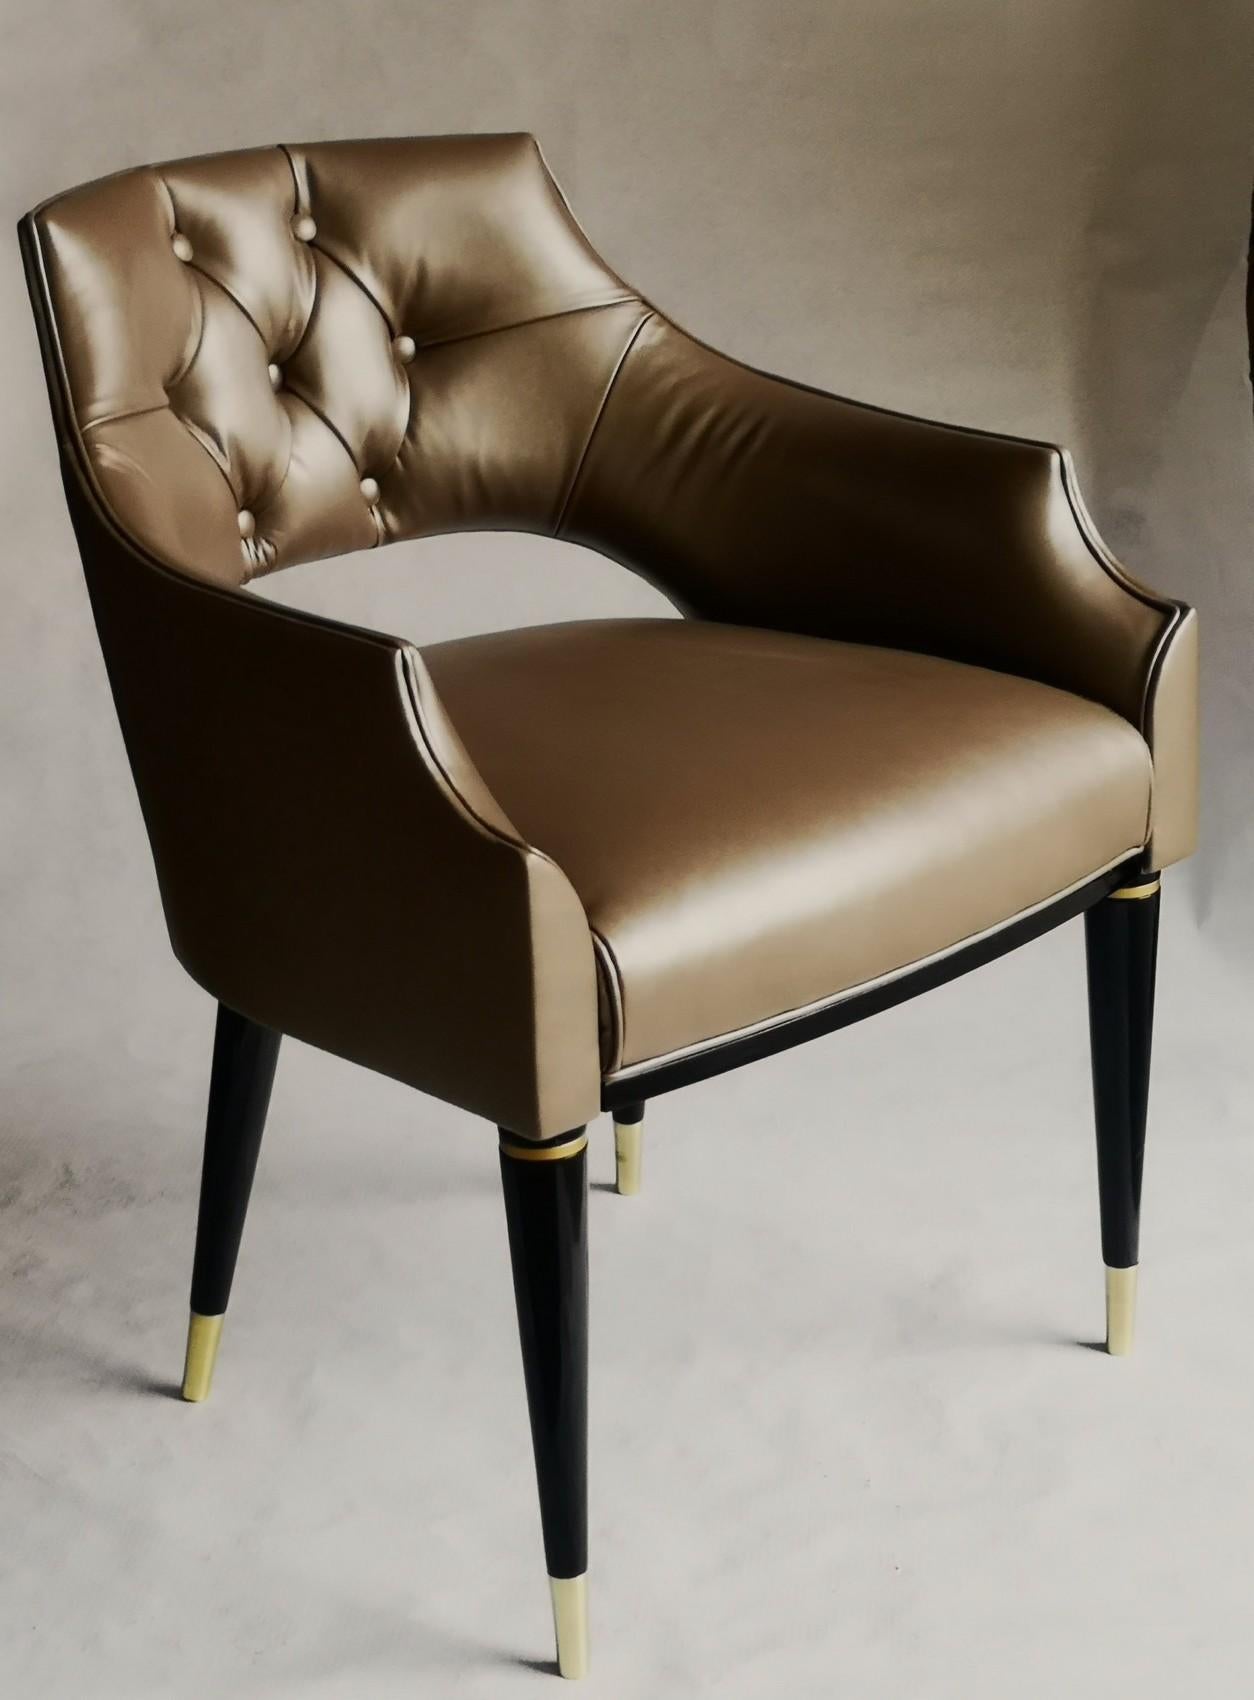 Dining Armchair, Tufted Fiore Italian Leather, Midcentury Style, Luxury Details 6